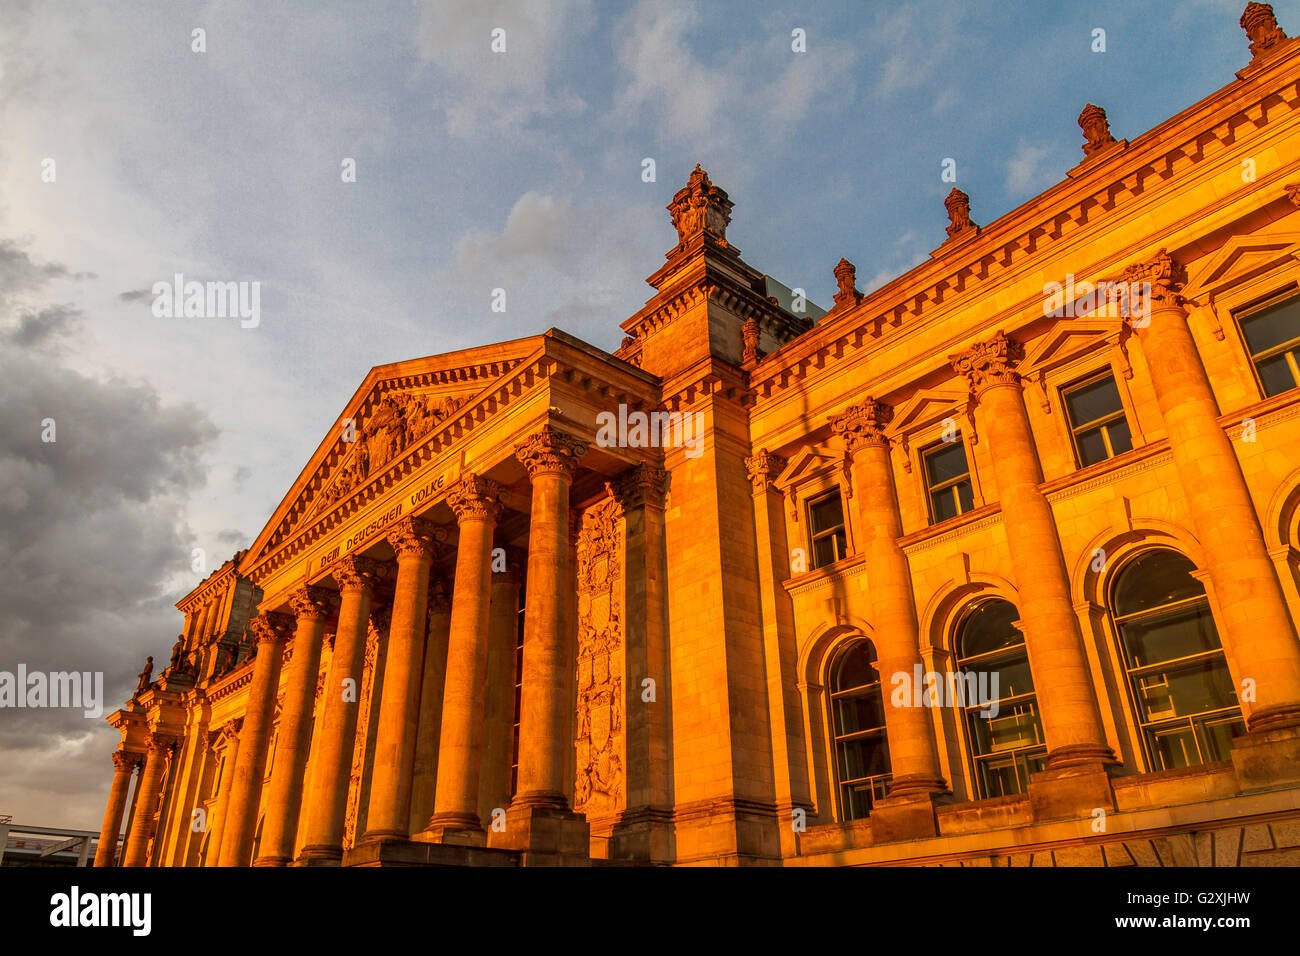 The exterior of the Reichstag building home of the German Parliament ,glowing in the setting sun , Berlin. Germany Stock Photo